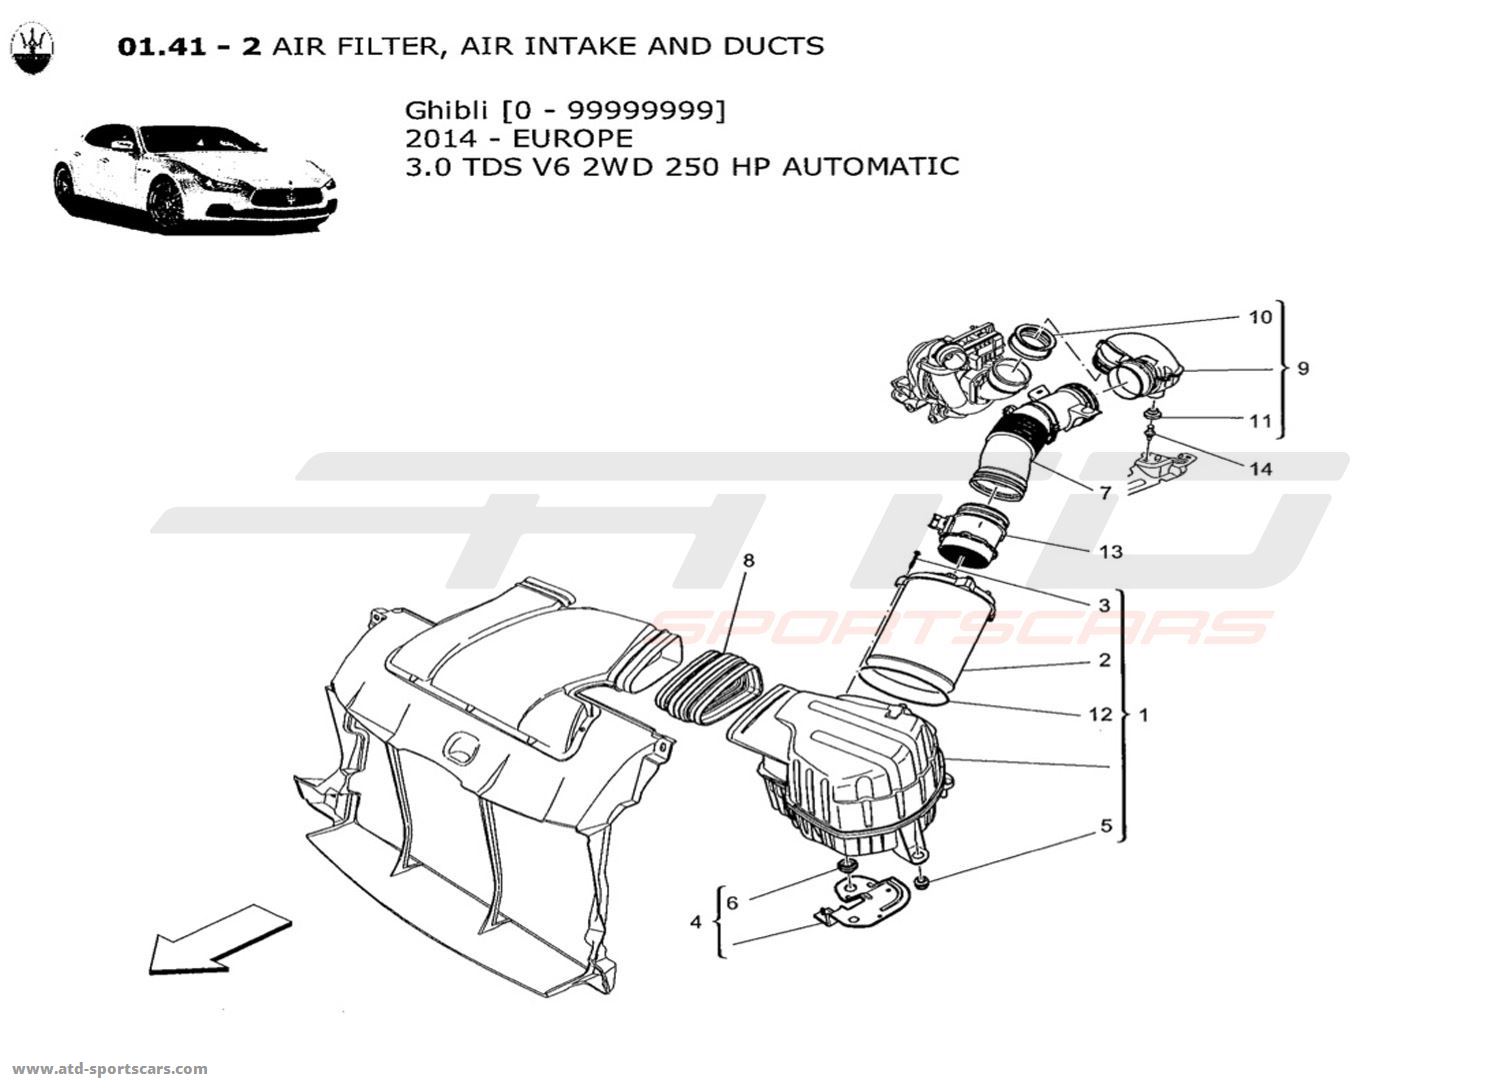 AIR FILTER, AIR INTAKE AND DUCTS